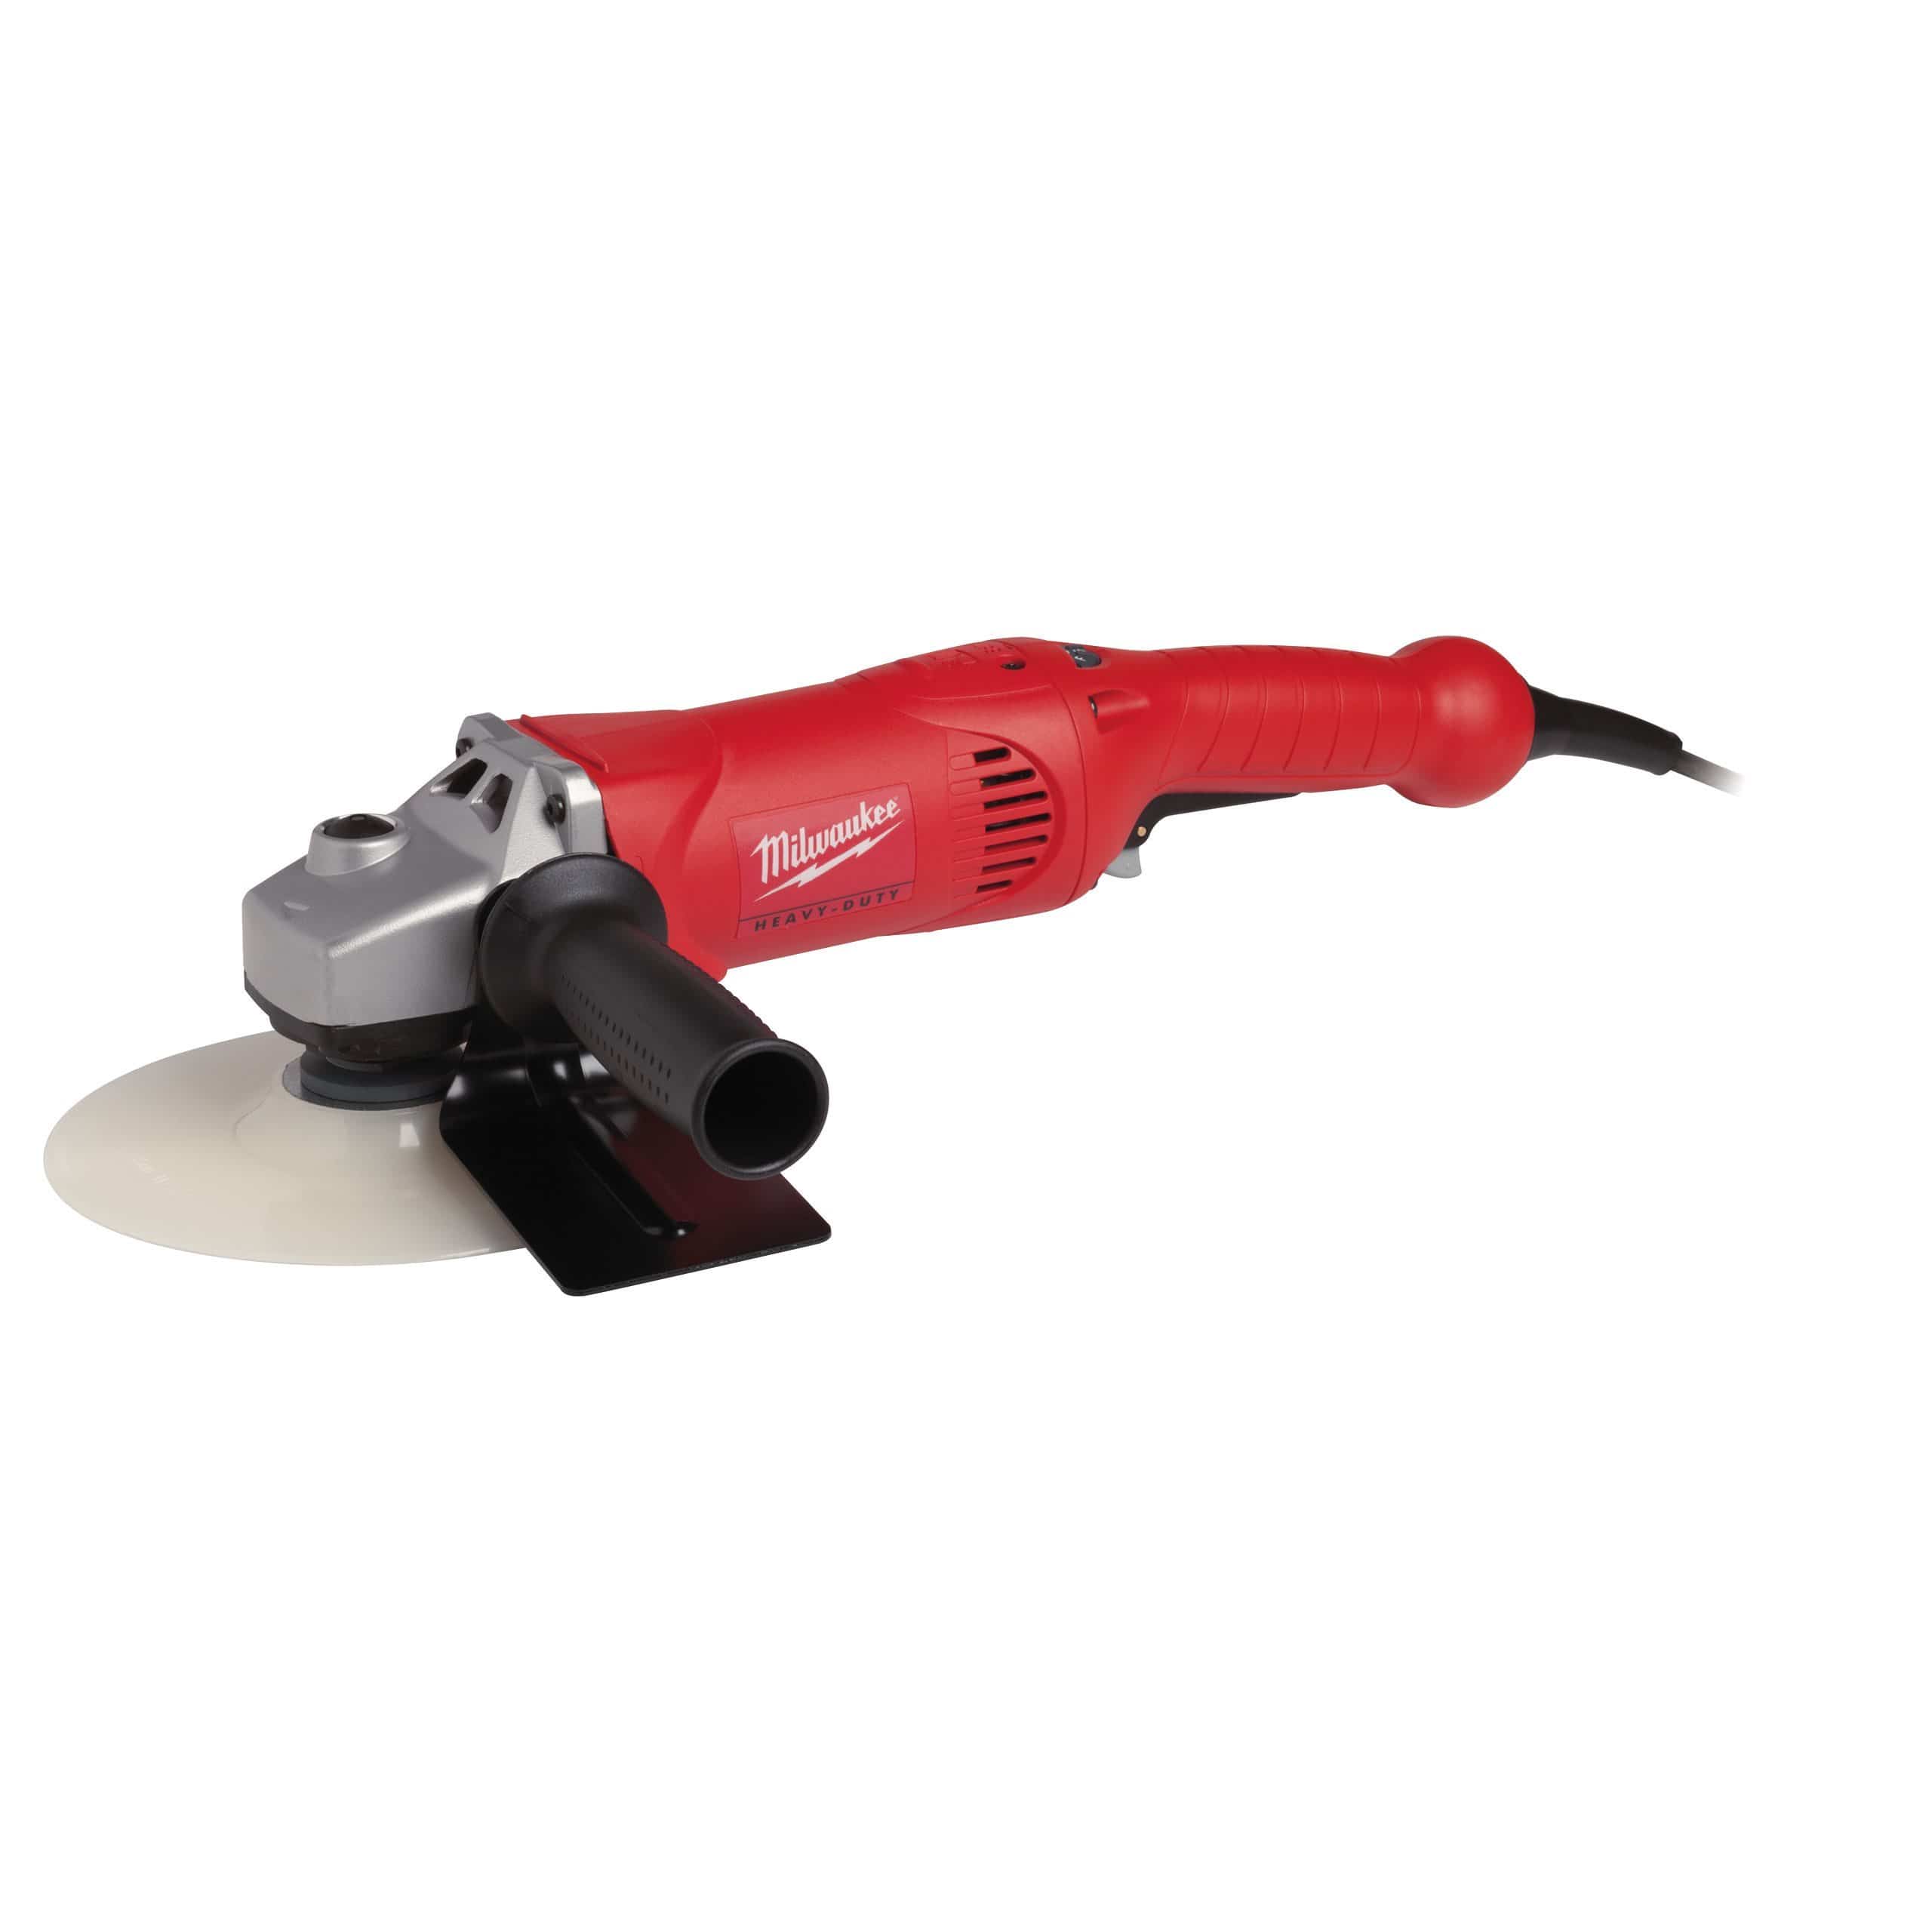 Milwaukee Sander 1200W with Electronic Variable Speed - AS 12 E | Supply Master | Accra, Ghana Tools Building Steel Engineering Hardware tool